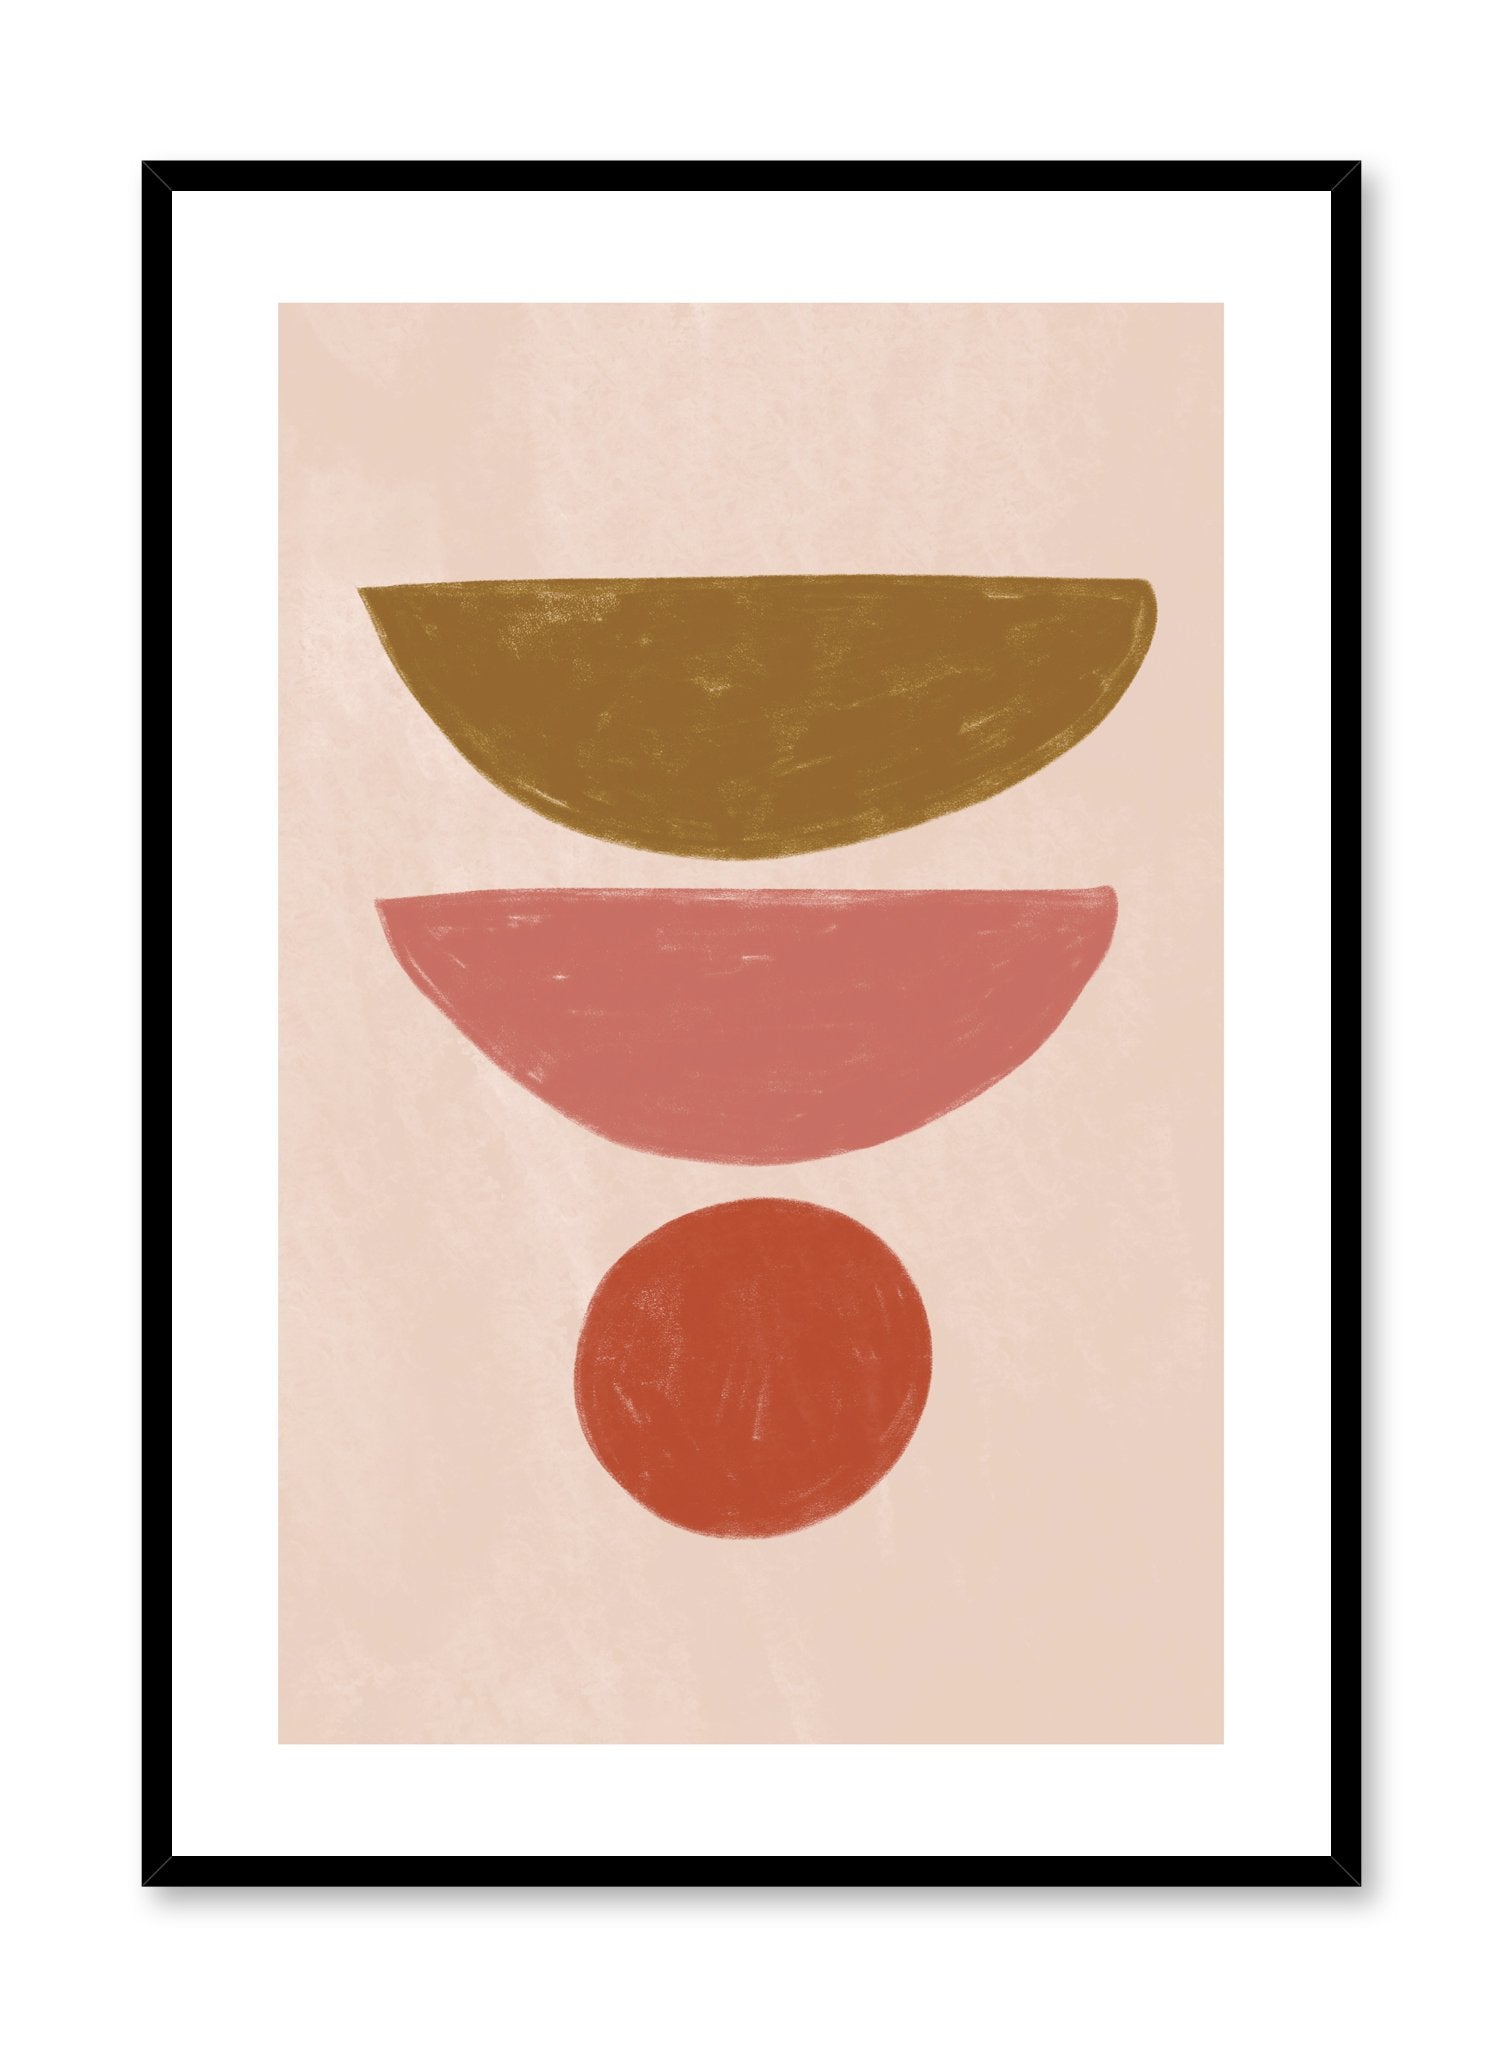 Modern abstract illustration poster by Opposite Wall with balancing shapes by Toffie Affichiste